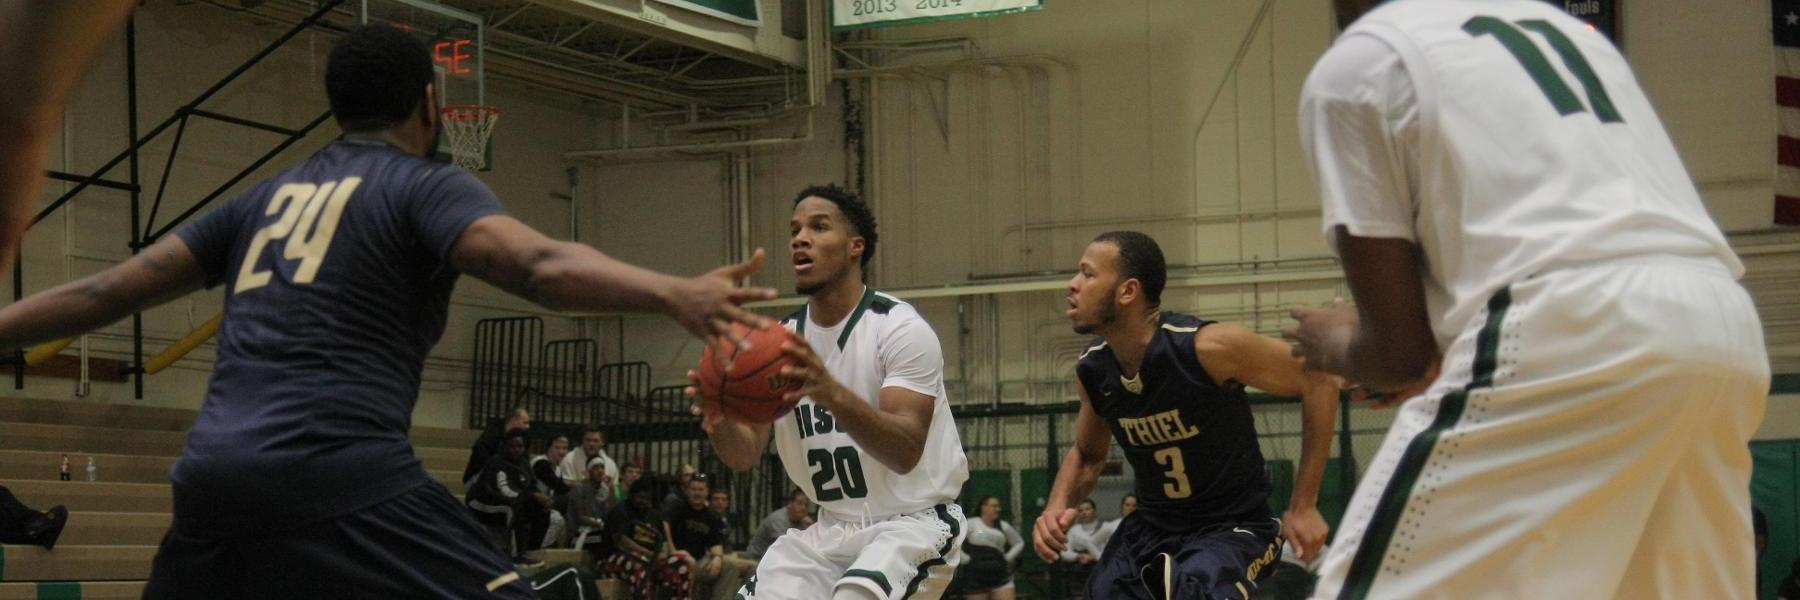 Men's Hoops Falls to Thomas More in PAC Tournament Semifinals